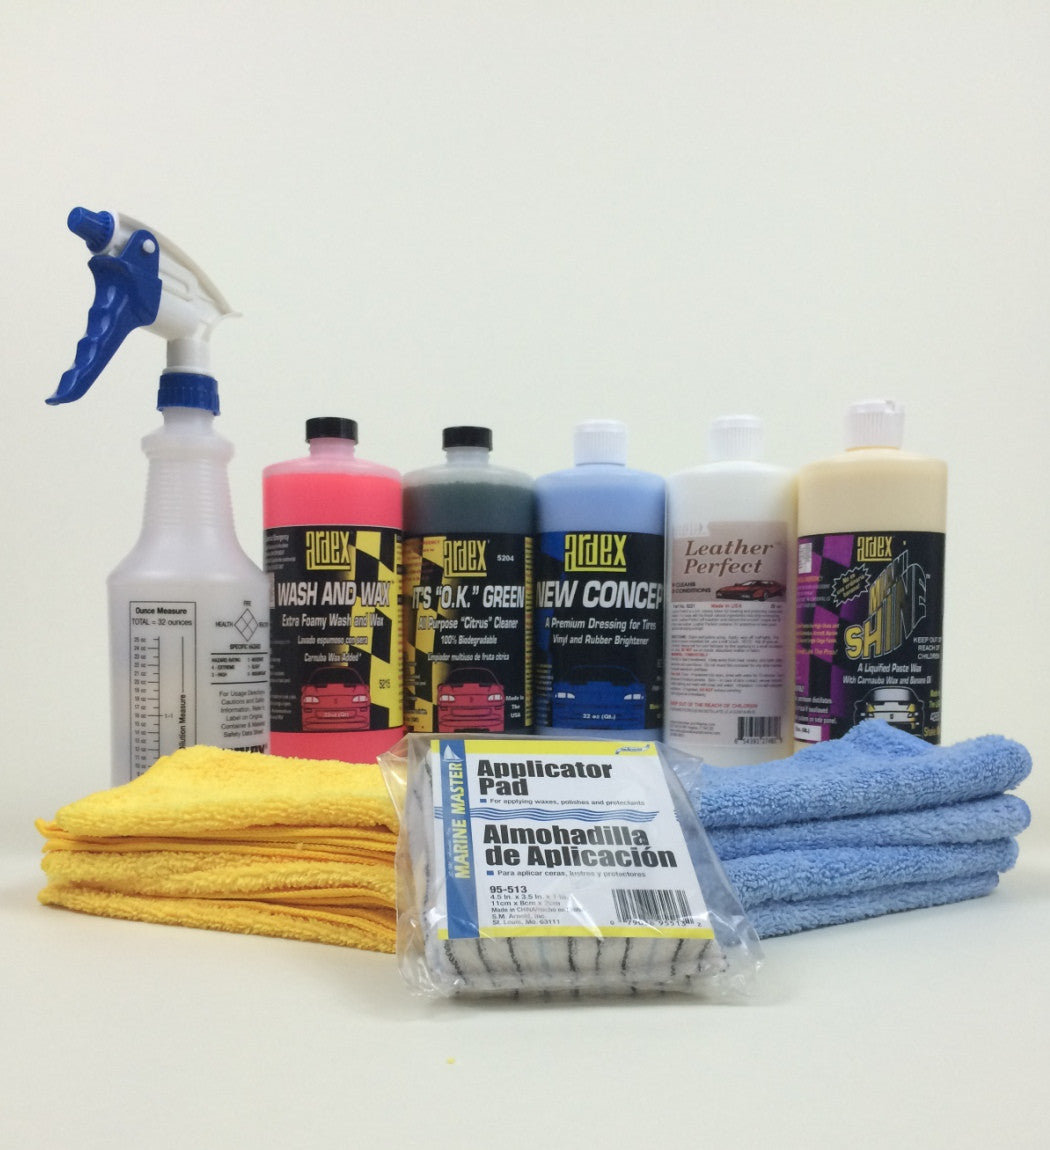 Car Detailing Kit 32 oz - with Leather Cleaner Conditioner - Ardex